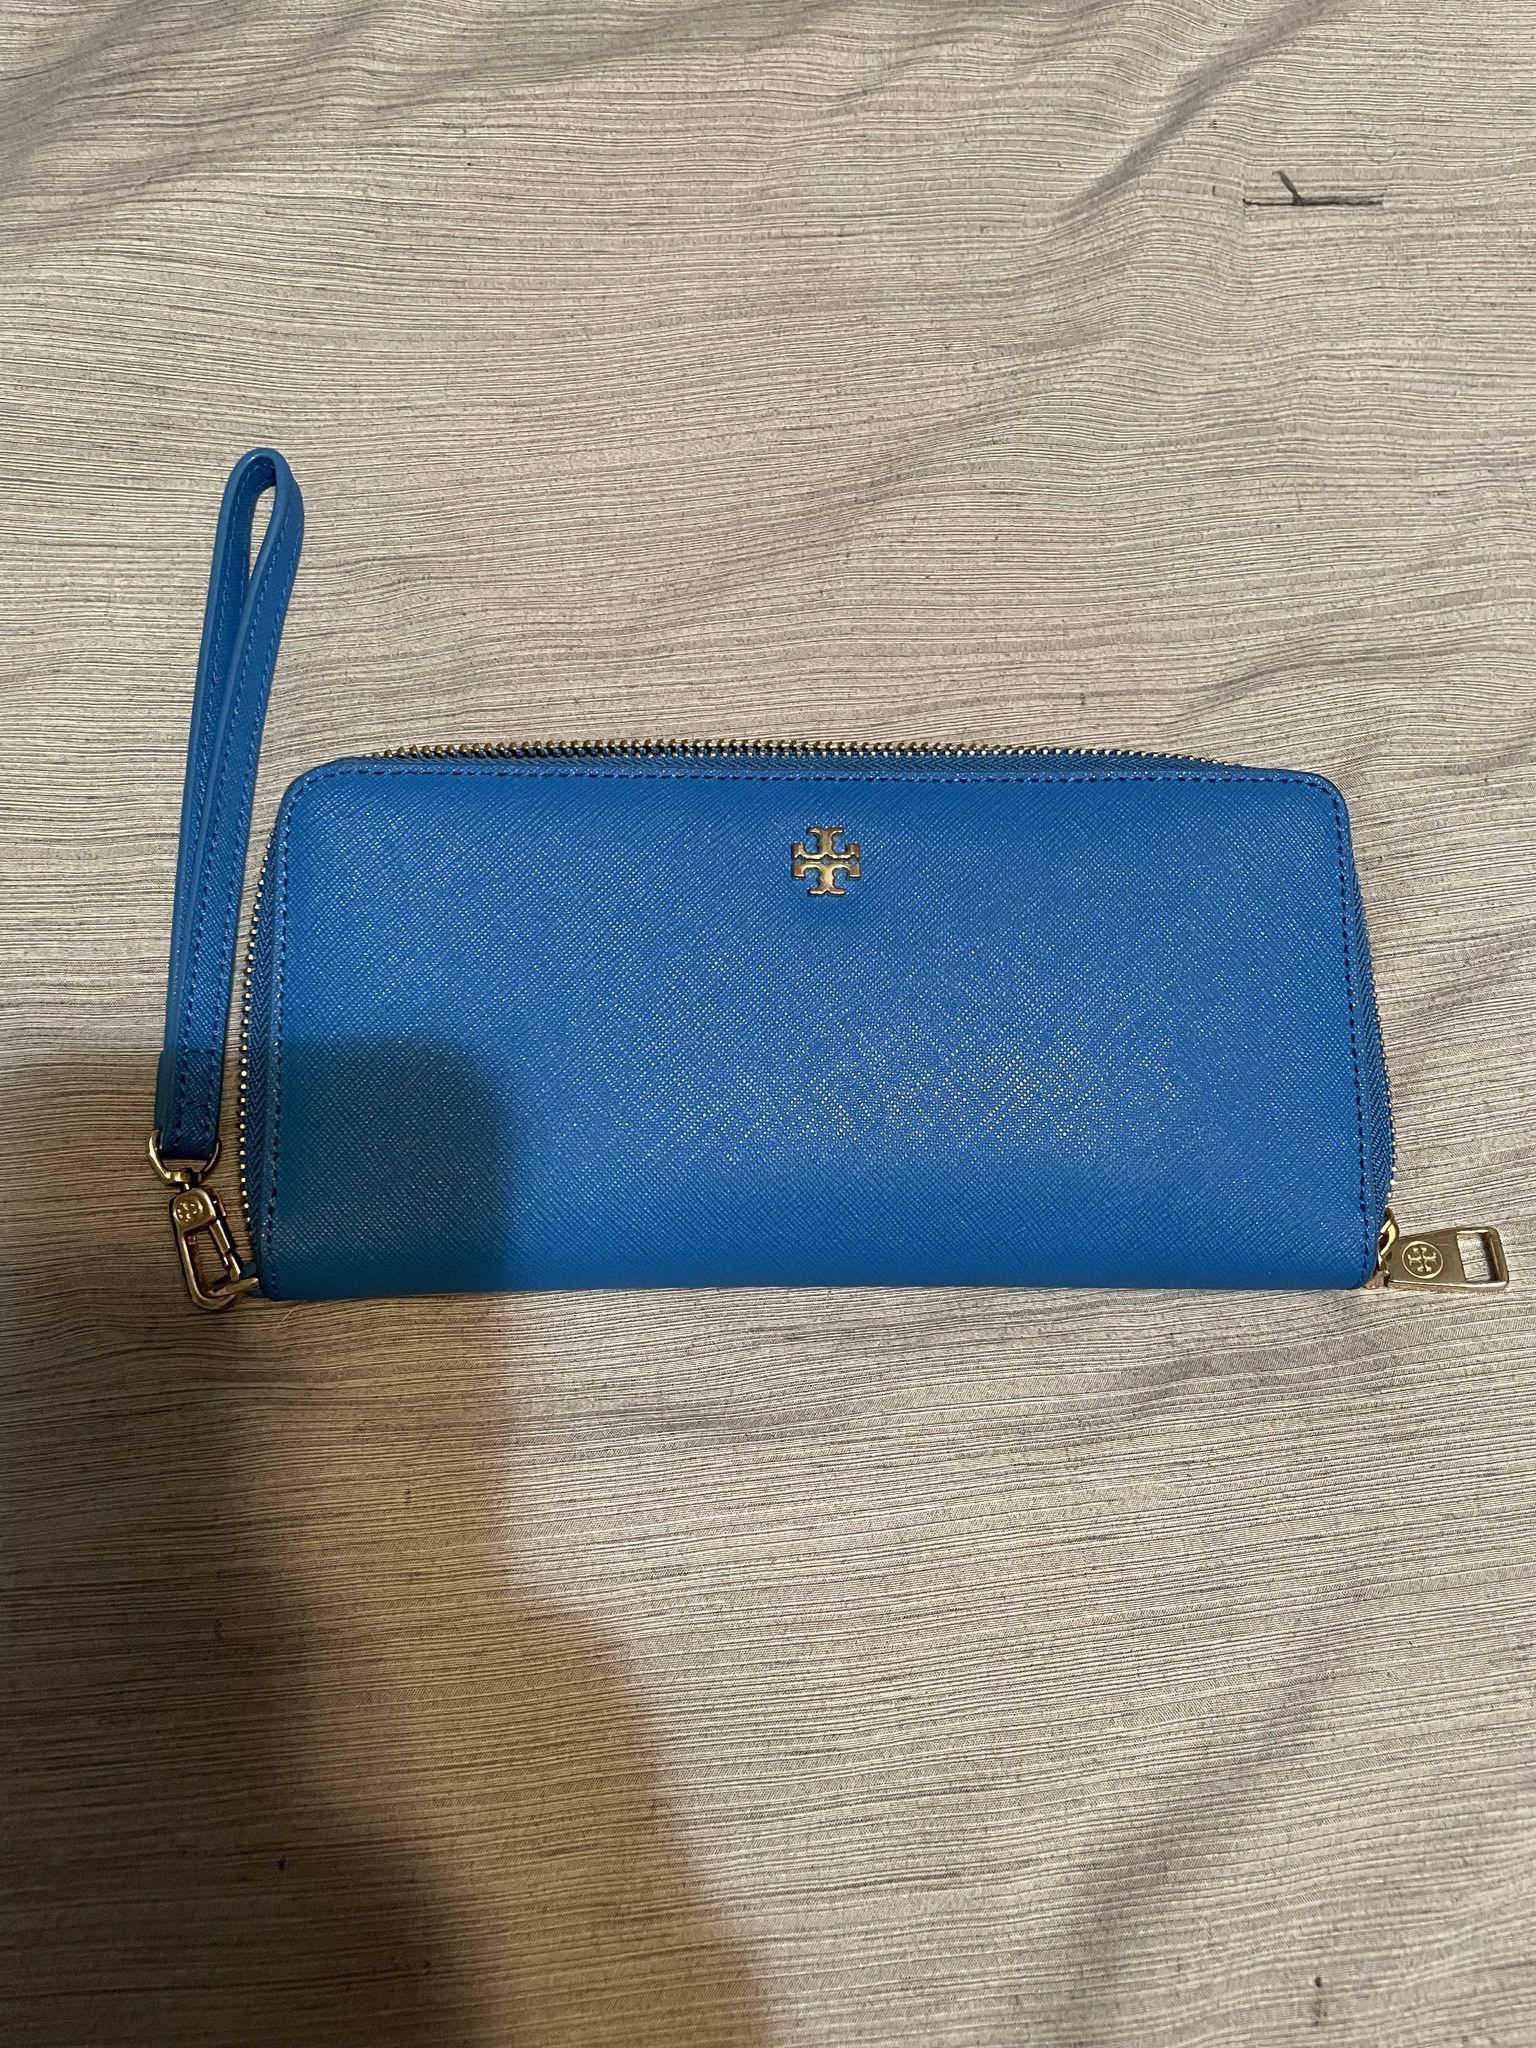 Like New Authentic Tory Burch Wallet for Sale in Belleville, IL - OfferUp